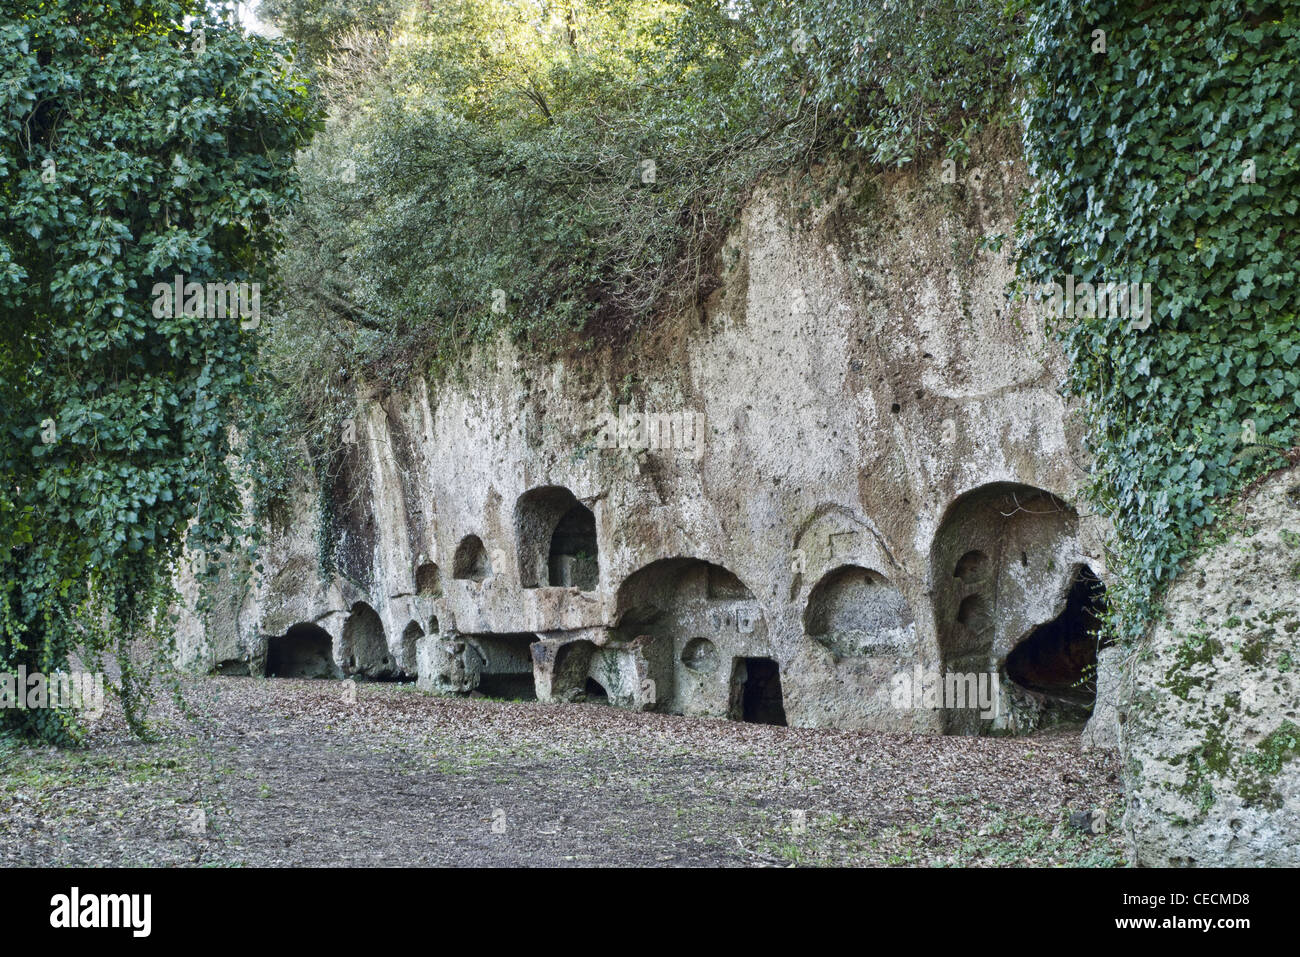 Tombs in the Roman Necropolis of Sutri, central Italy. Stock Photo